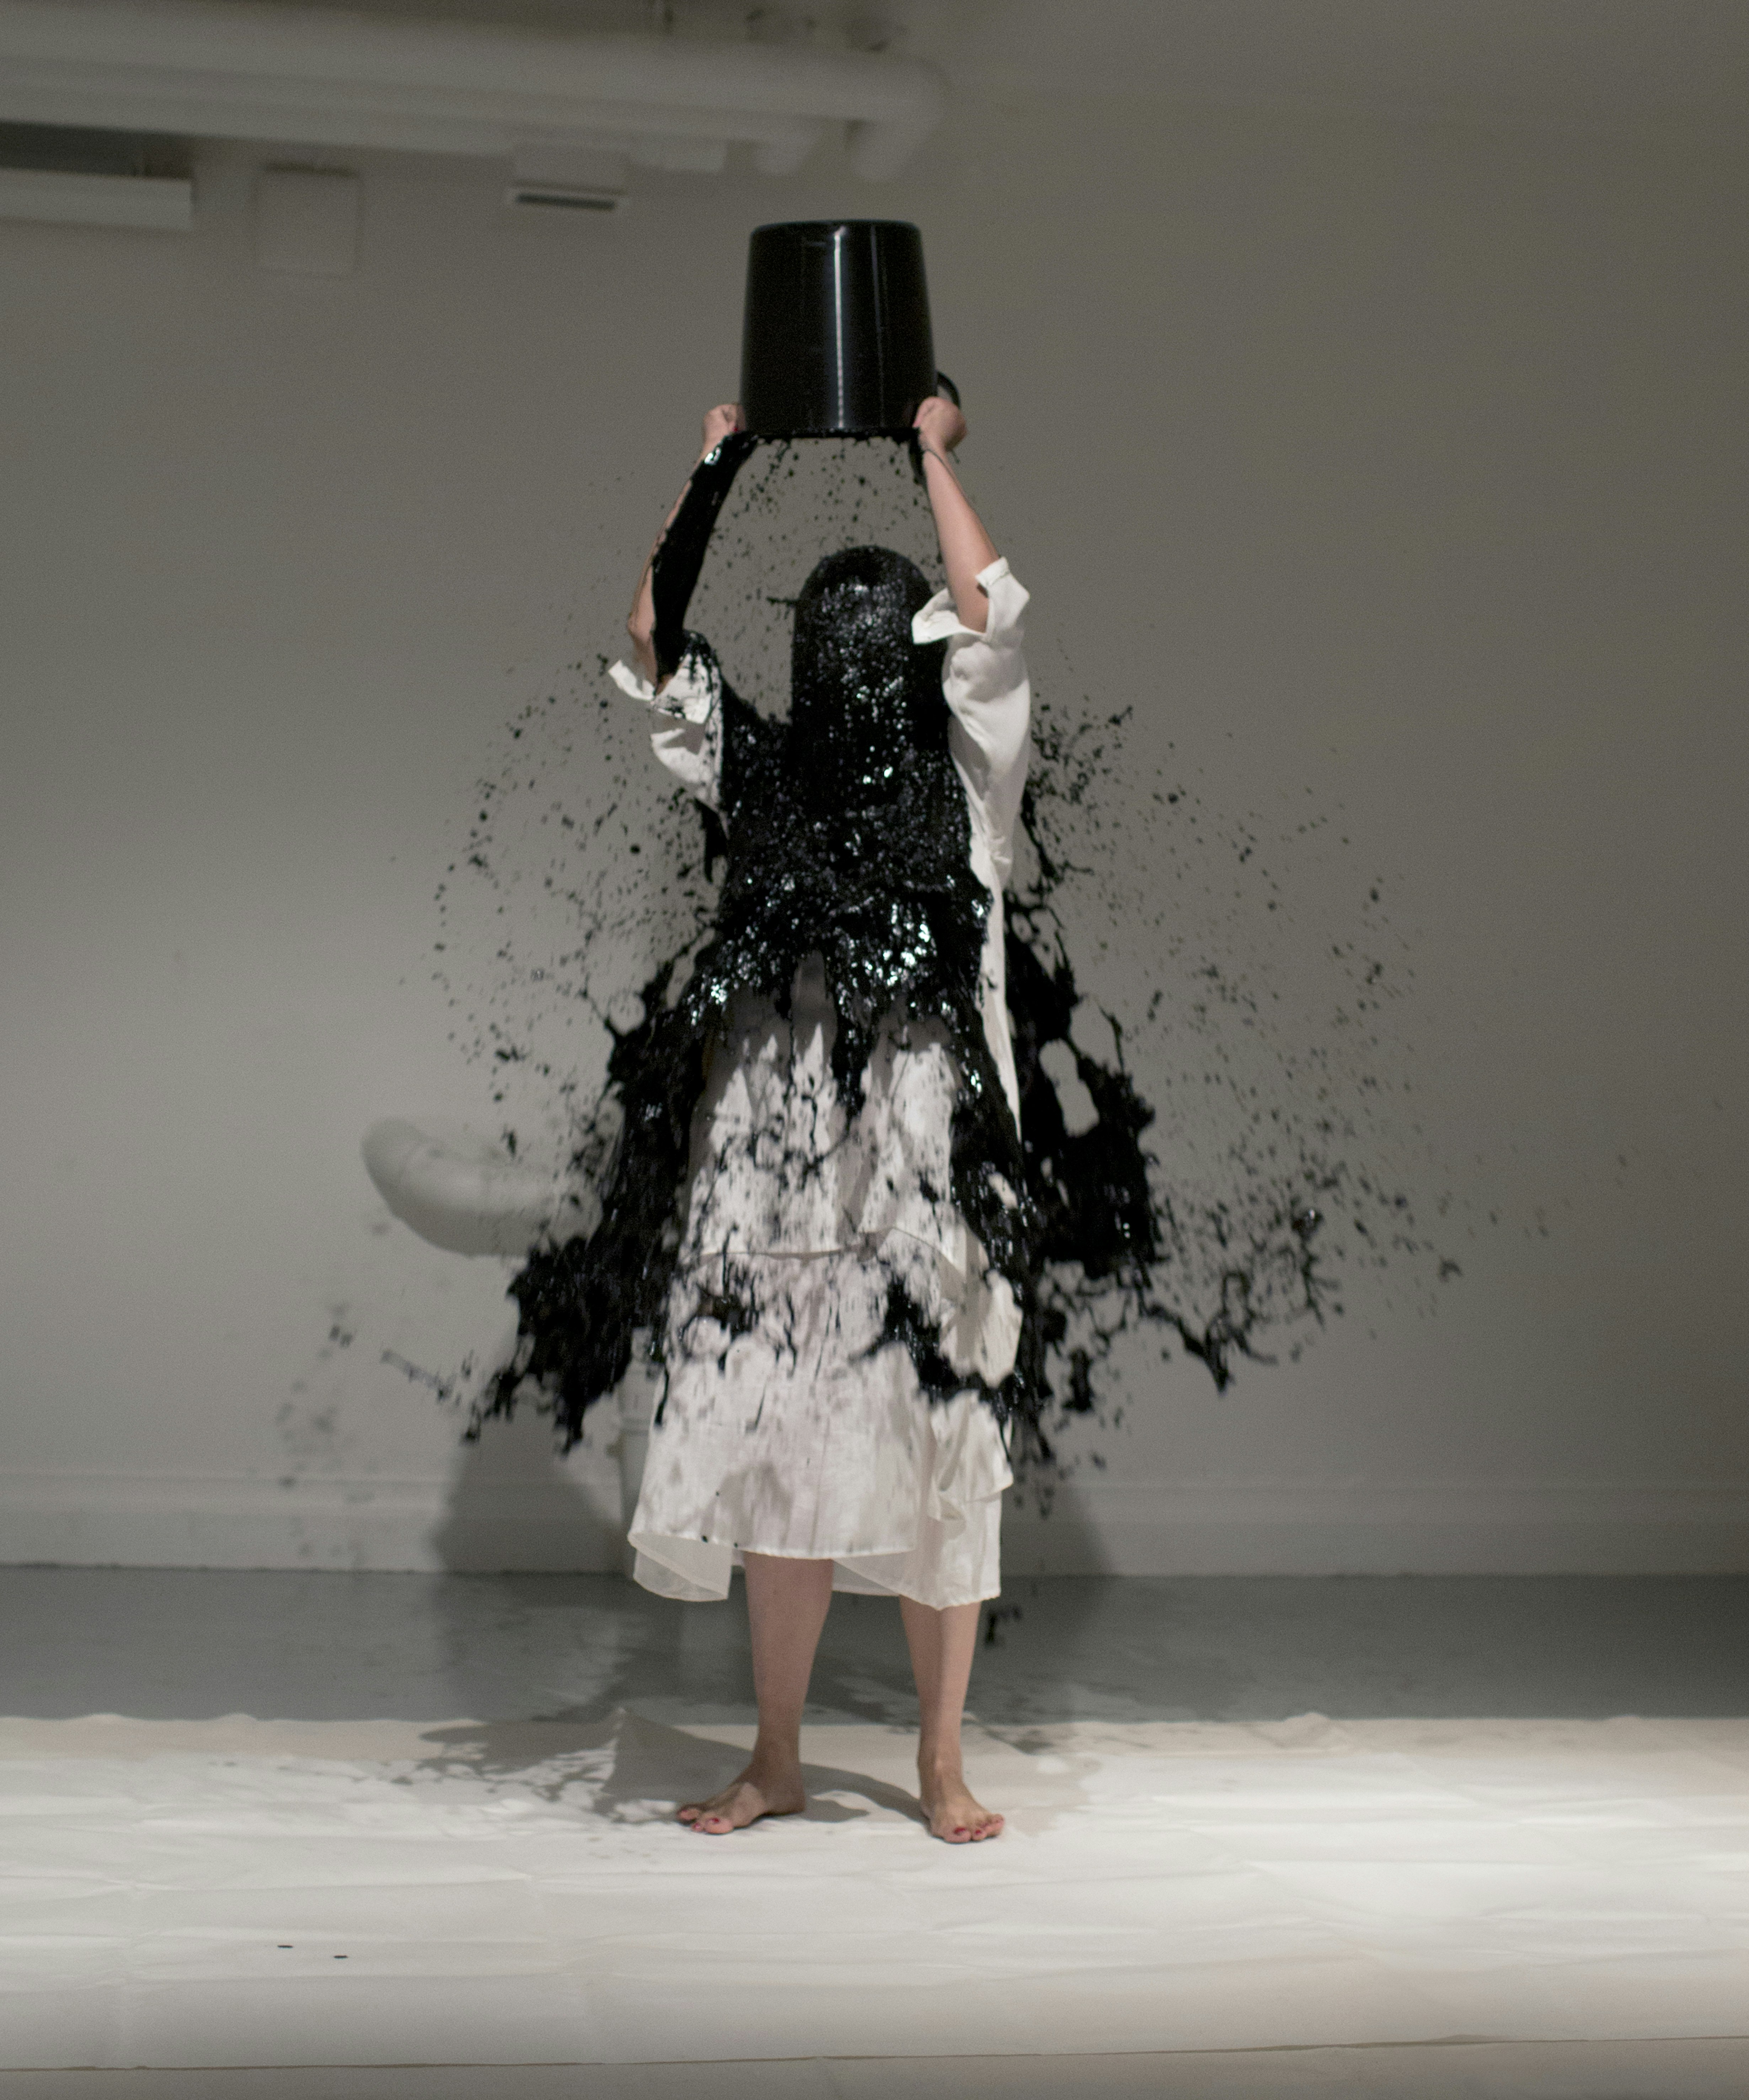 A photo of artist Xiao Lu, standing in a white dress raising a black bucket above her head and black paint splashing across her head and body.